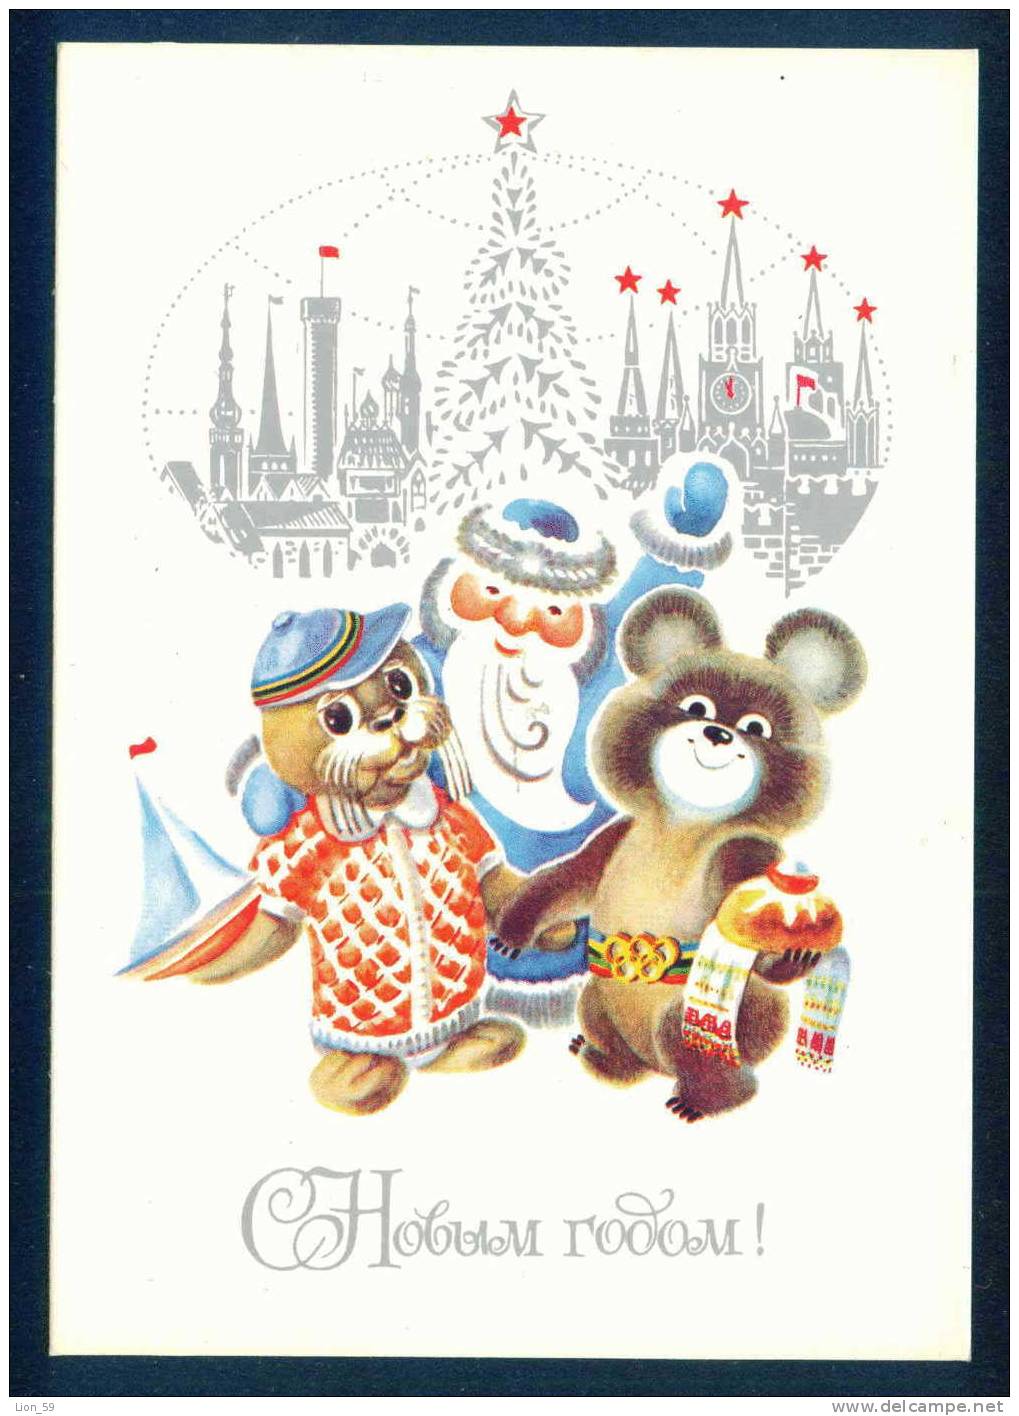 SANTA CLAUS BLUE - Misha Bear - OLYMPICS MOSCOW 1980 Christmas Tree, BREAD, Seals, Sailboat TOYS Russia Russie 34001 - Ours